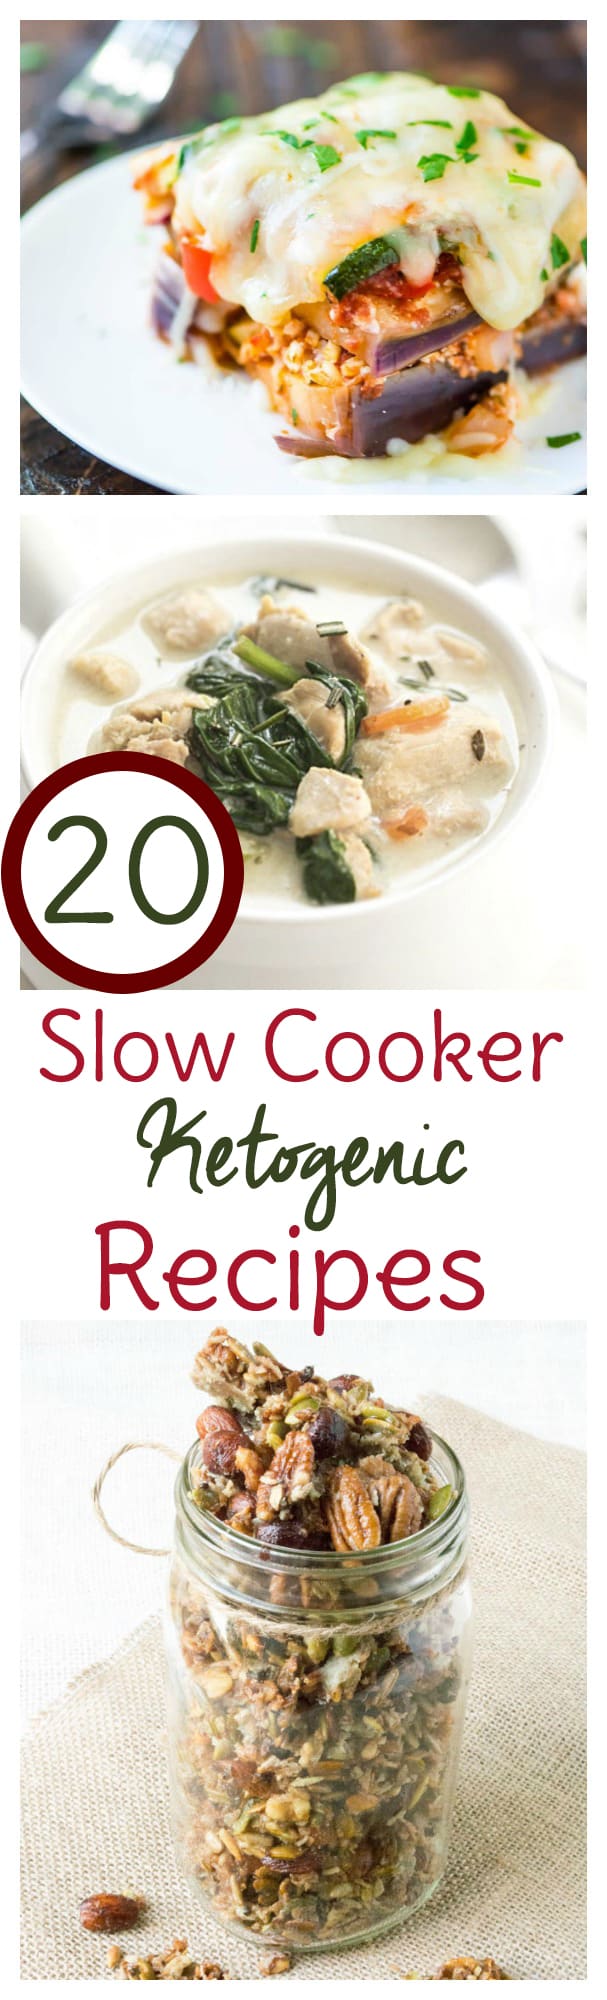 The ketogenic diet doesn't have to be hard. These 20 Crock Pot keto recipes make life on a low carb, high fat way of eating just a little easier. Fix it and forget it with slow cooker keto recipes!